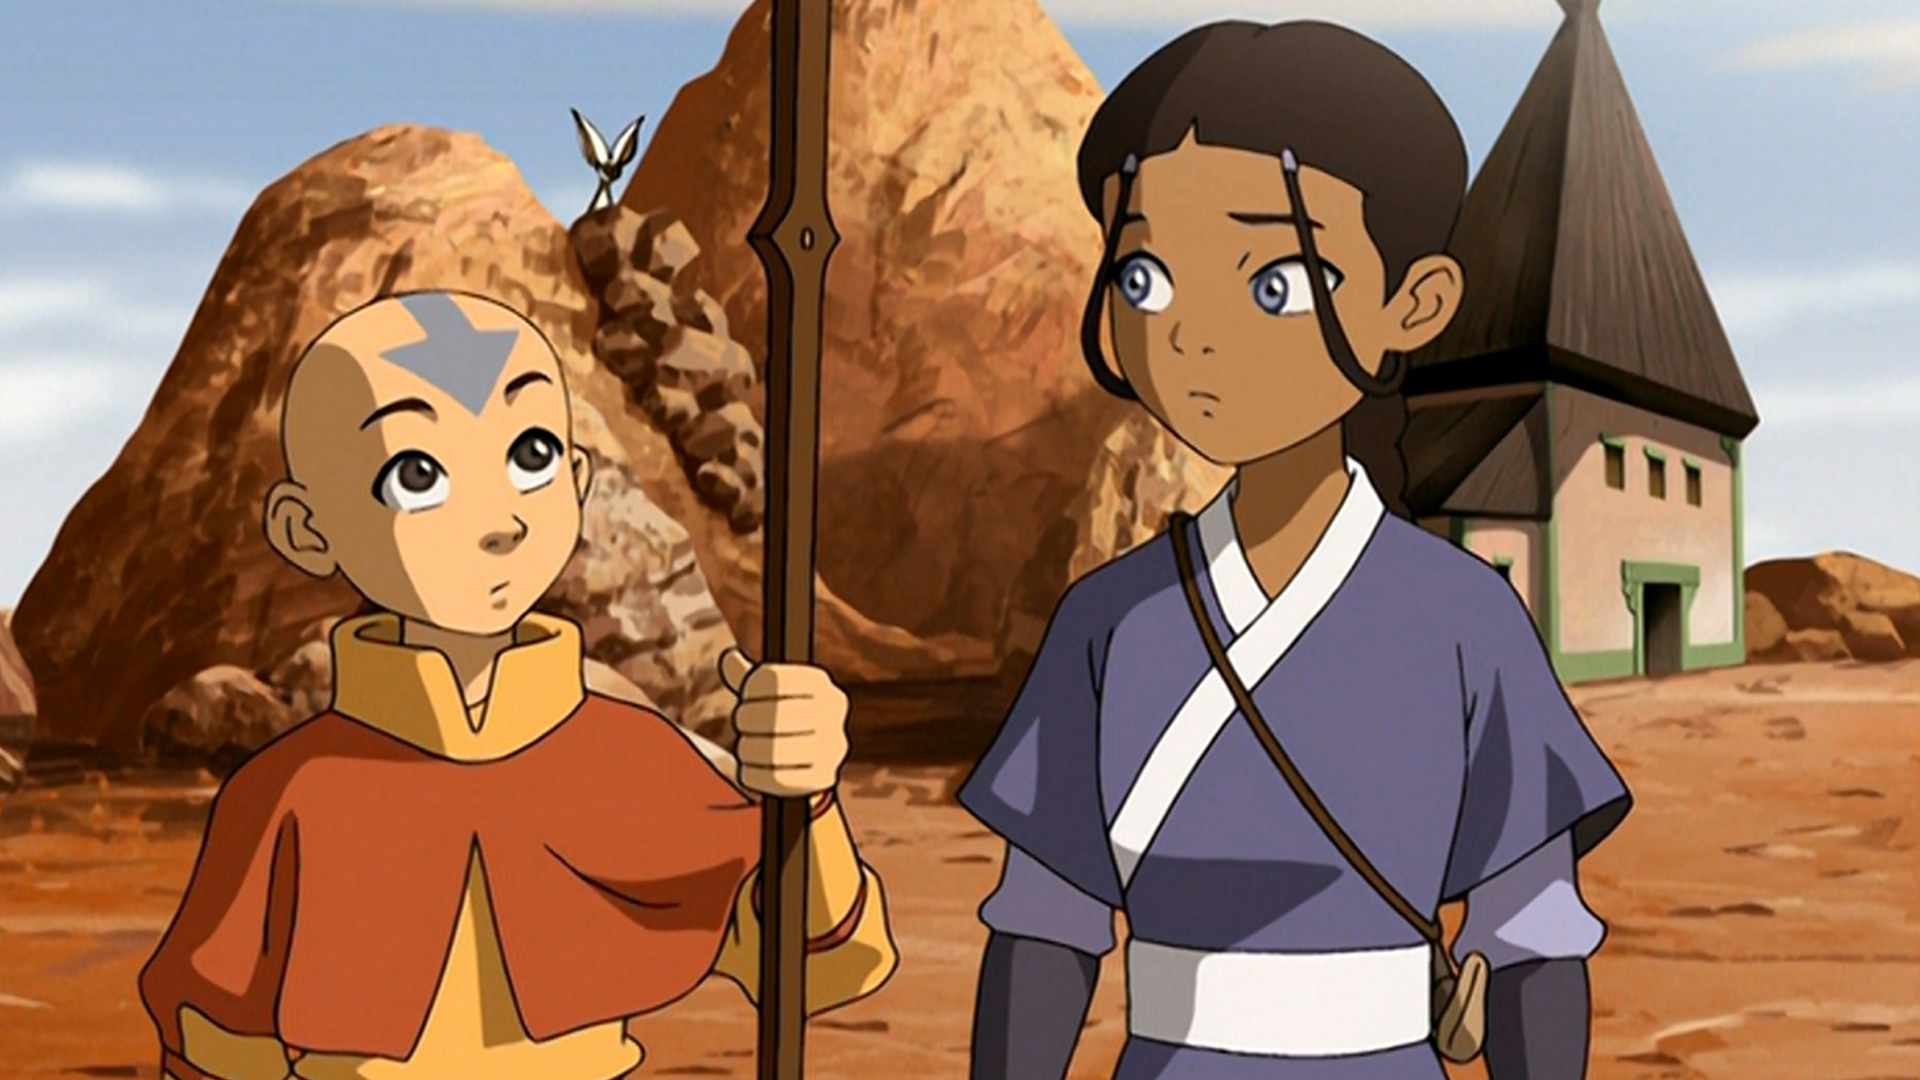 Avatar The Last Airbender Is One Of The Greatest TV Shows Of All Time